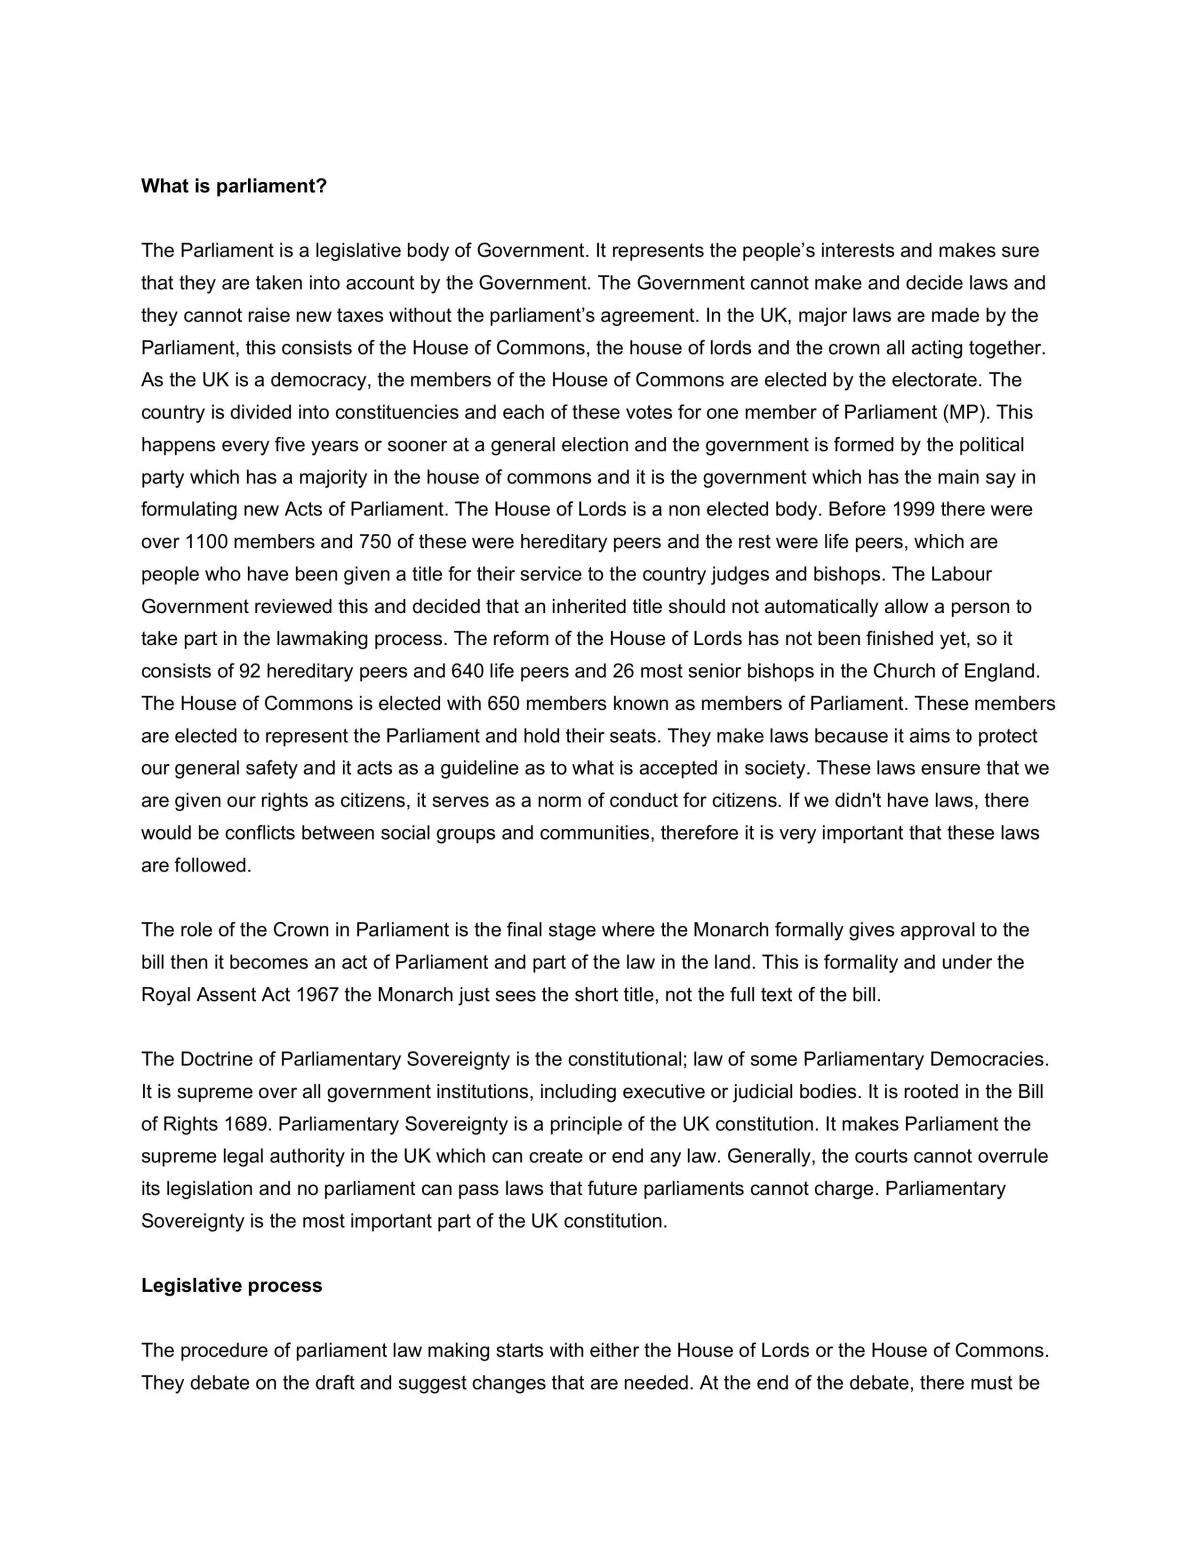 Essay on the parliament  - Page 1